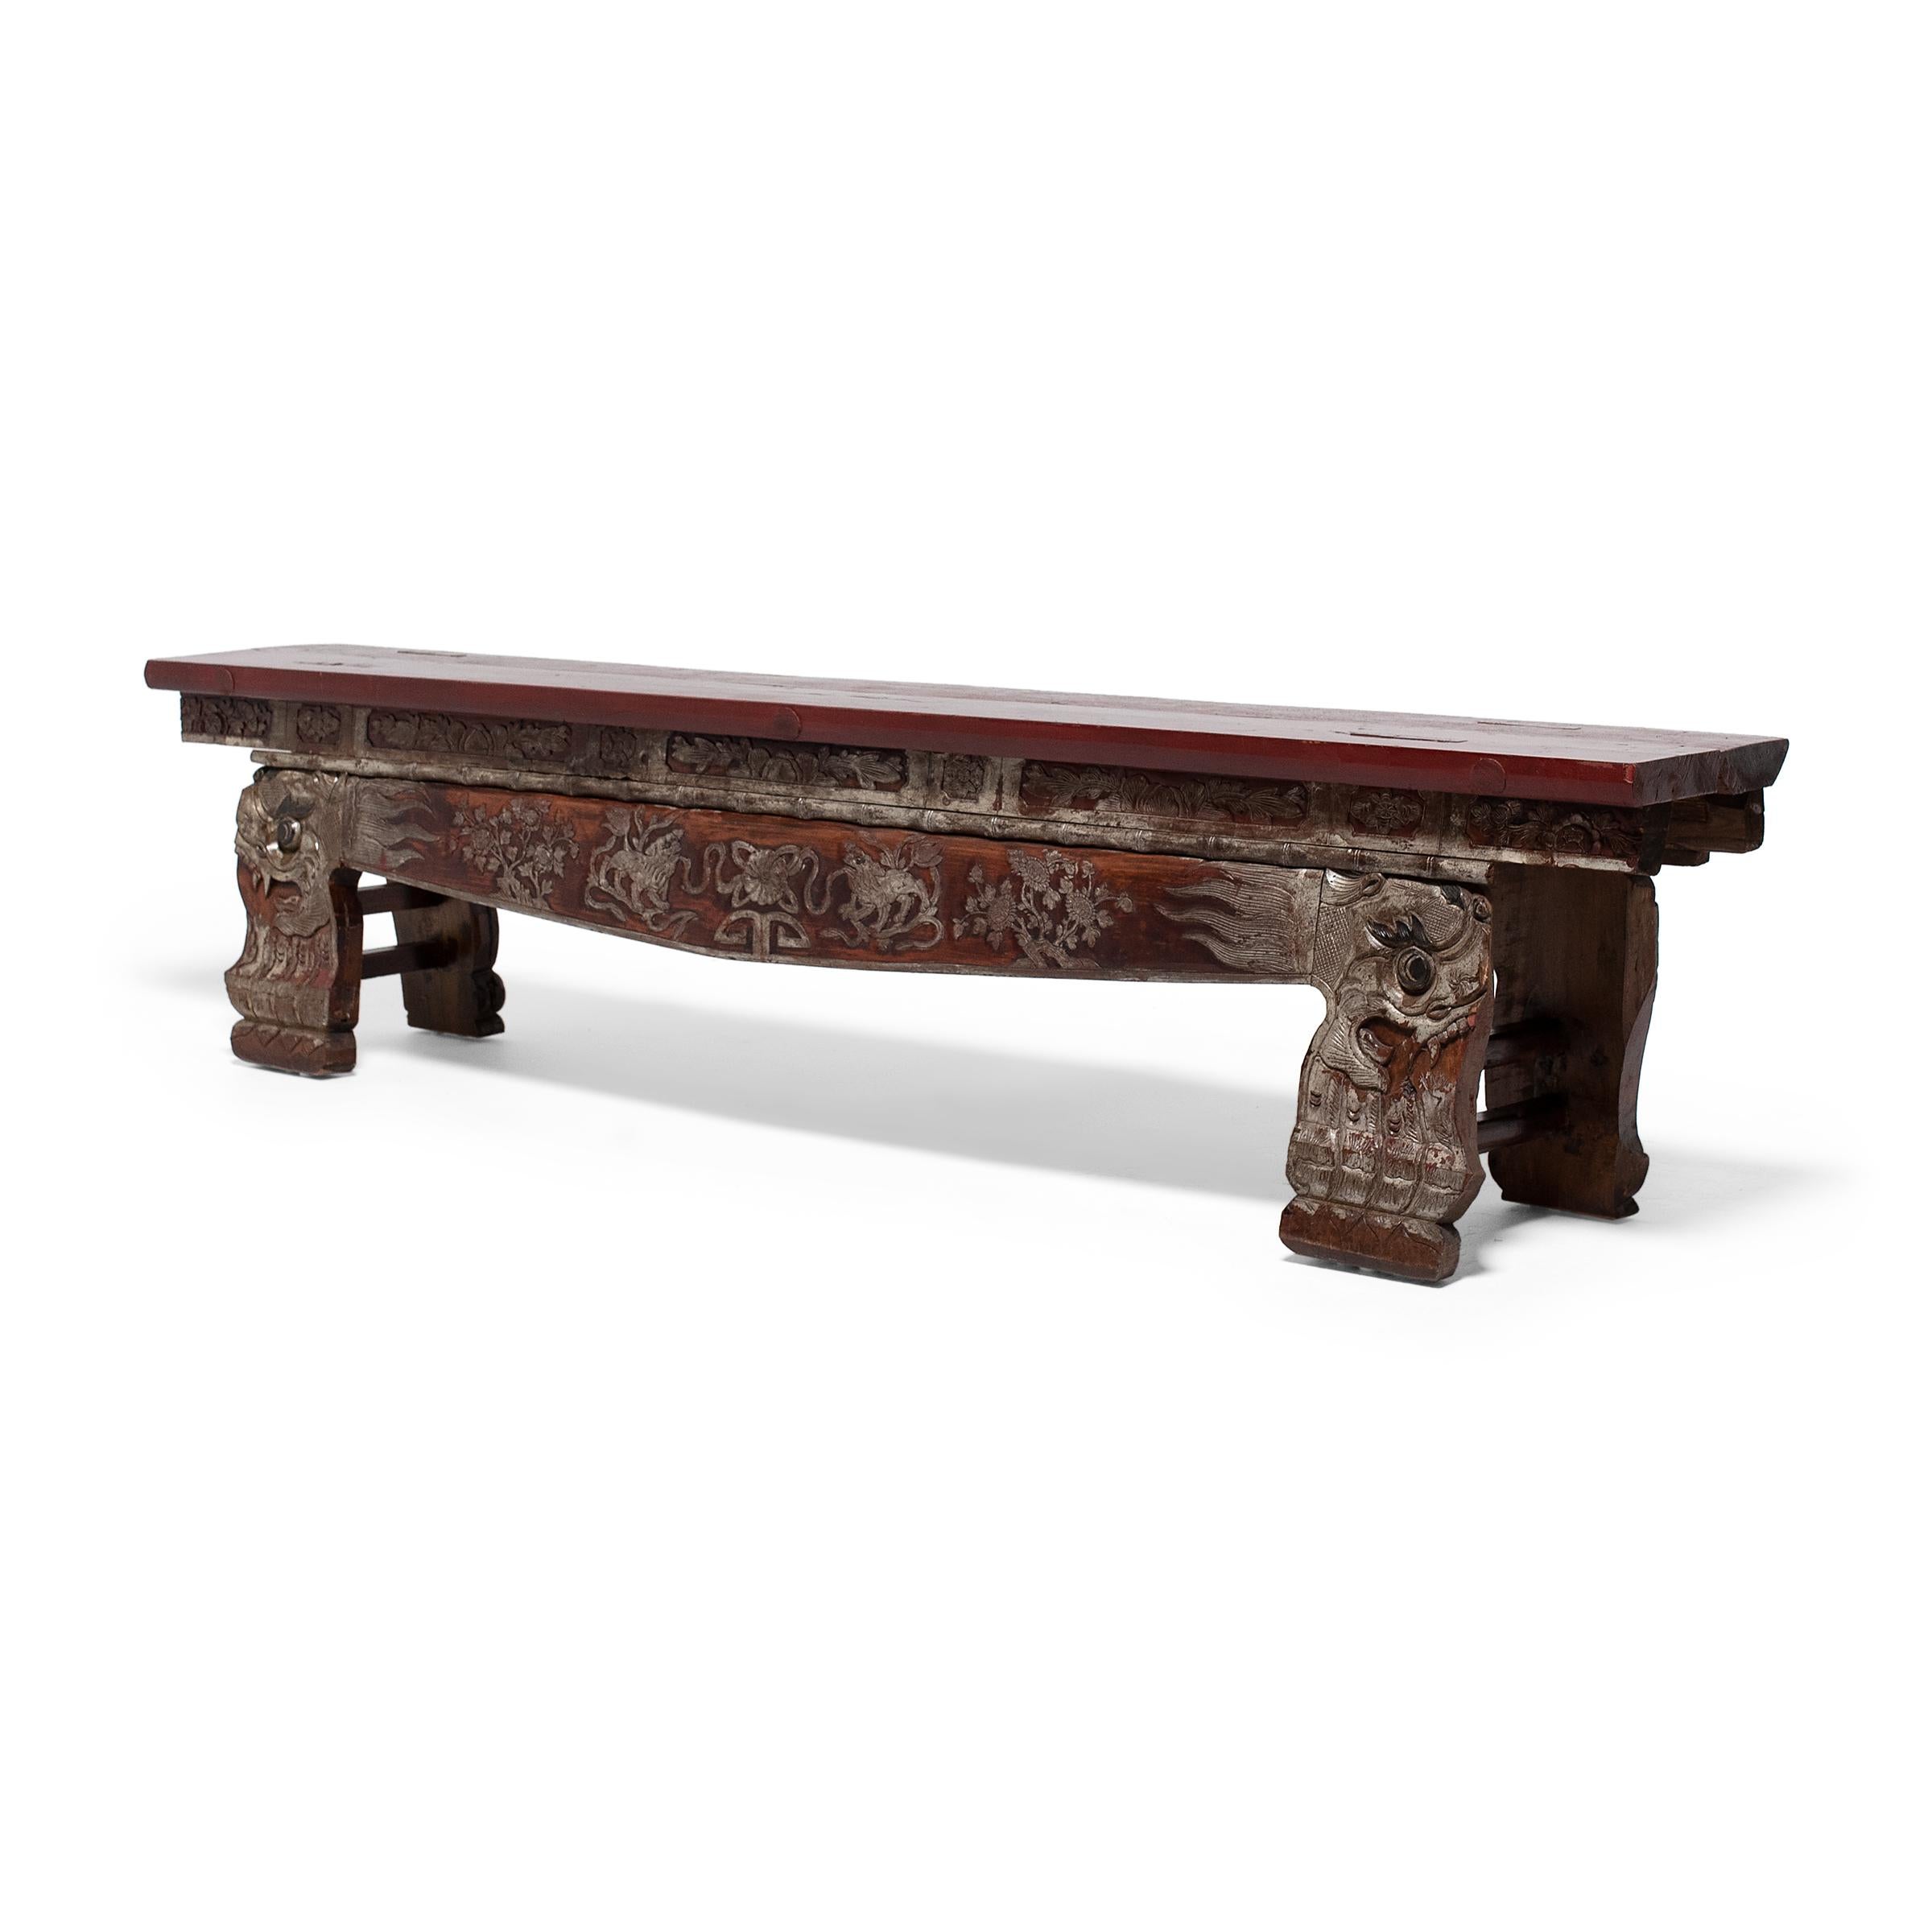 Qing Chinese Lacquered Theater Bench with Dragon Carvings, c. 1850 For Sale